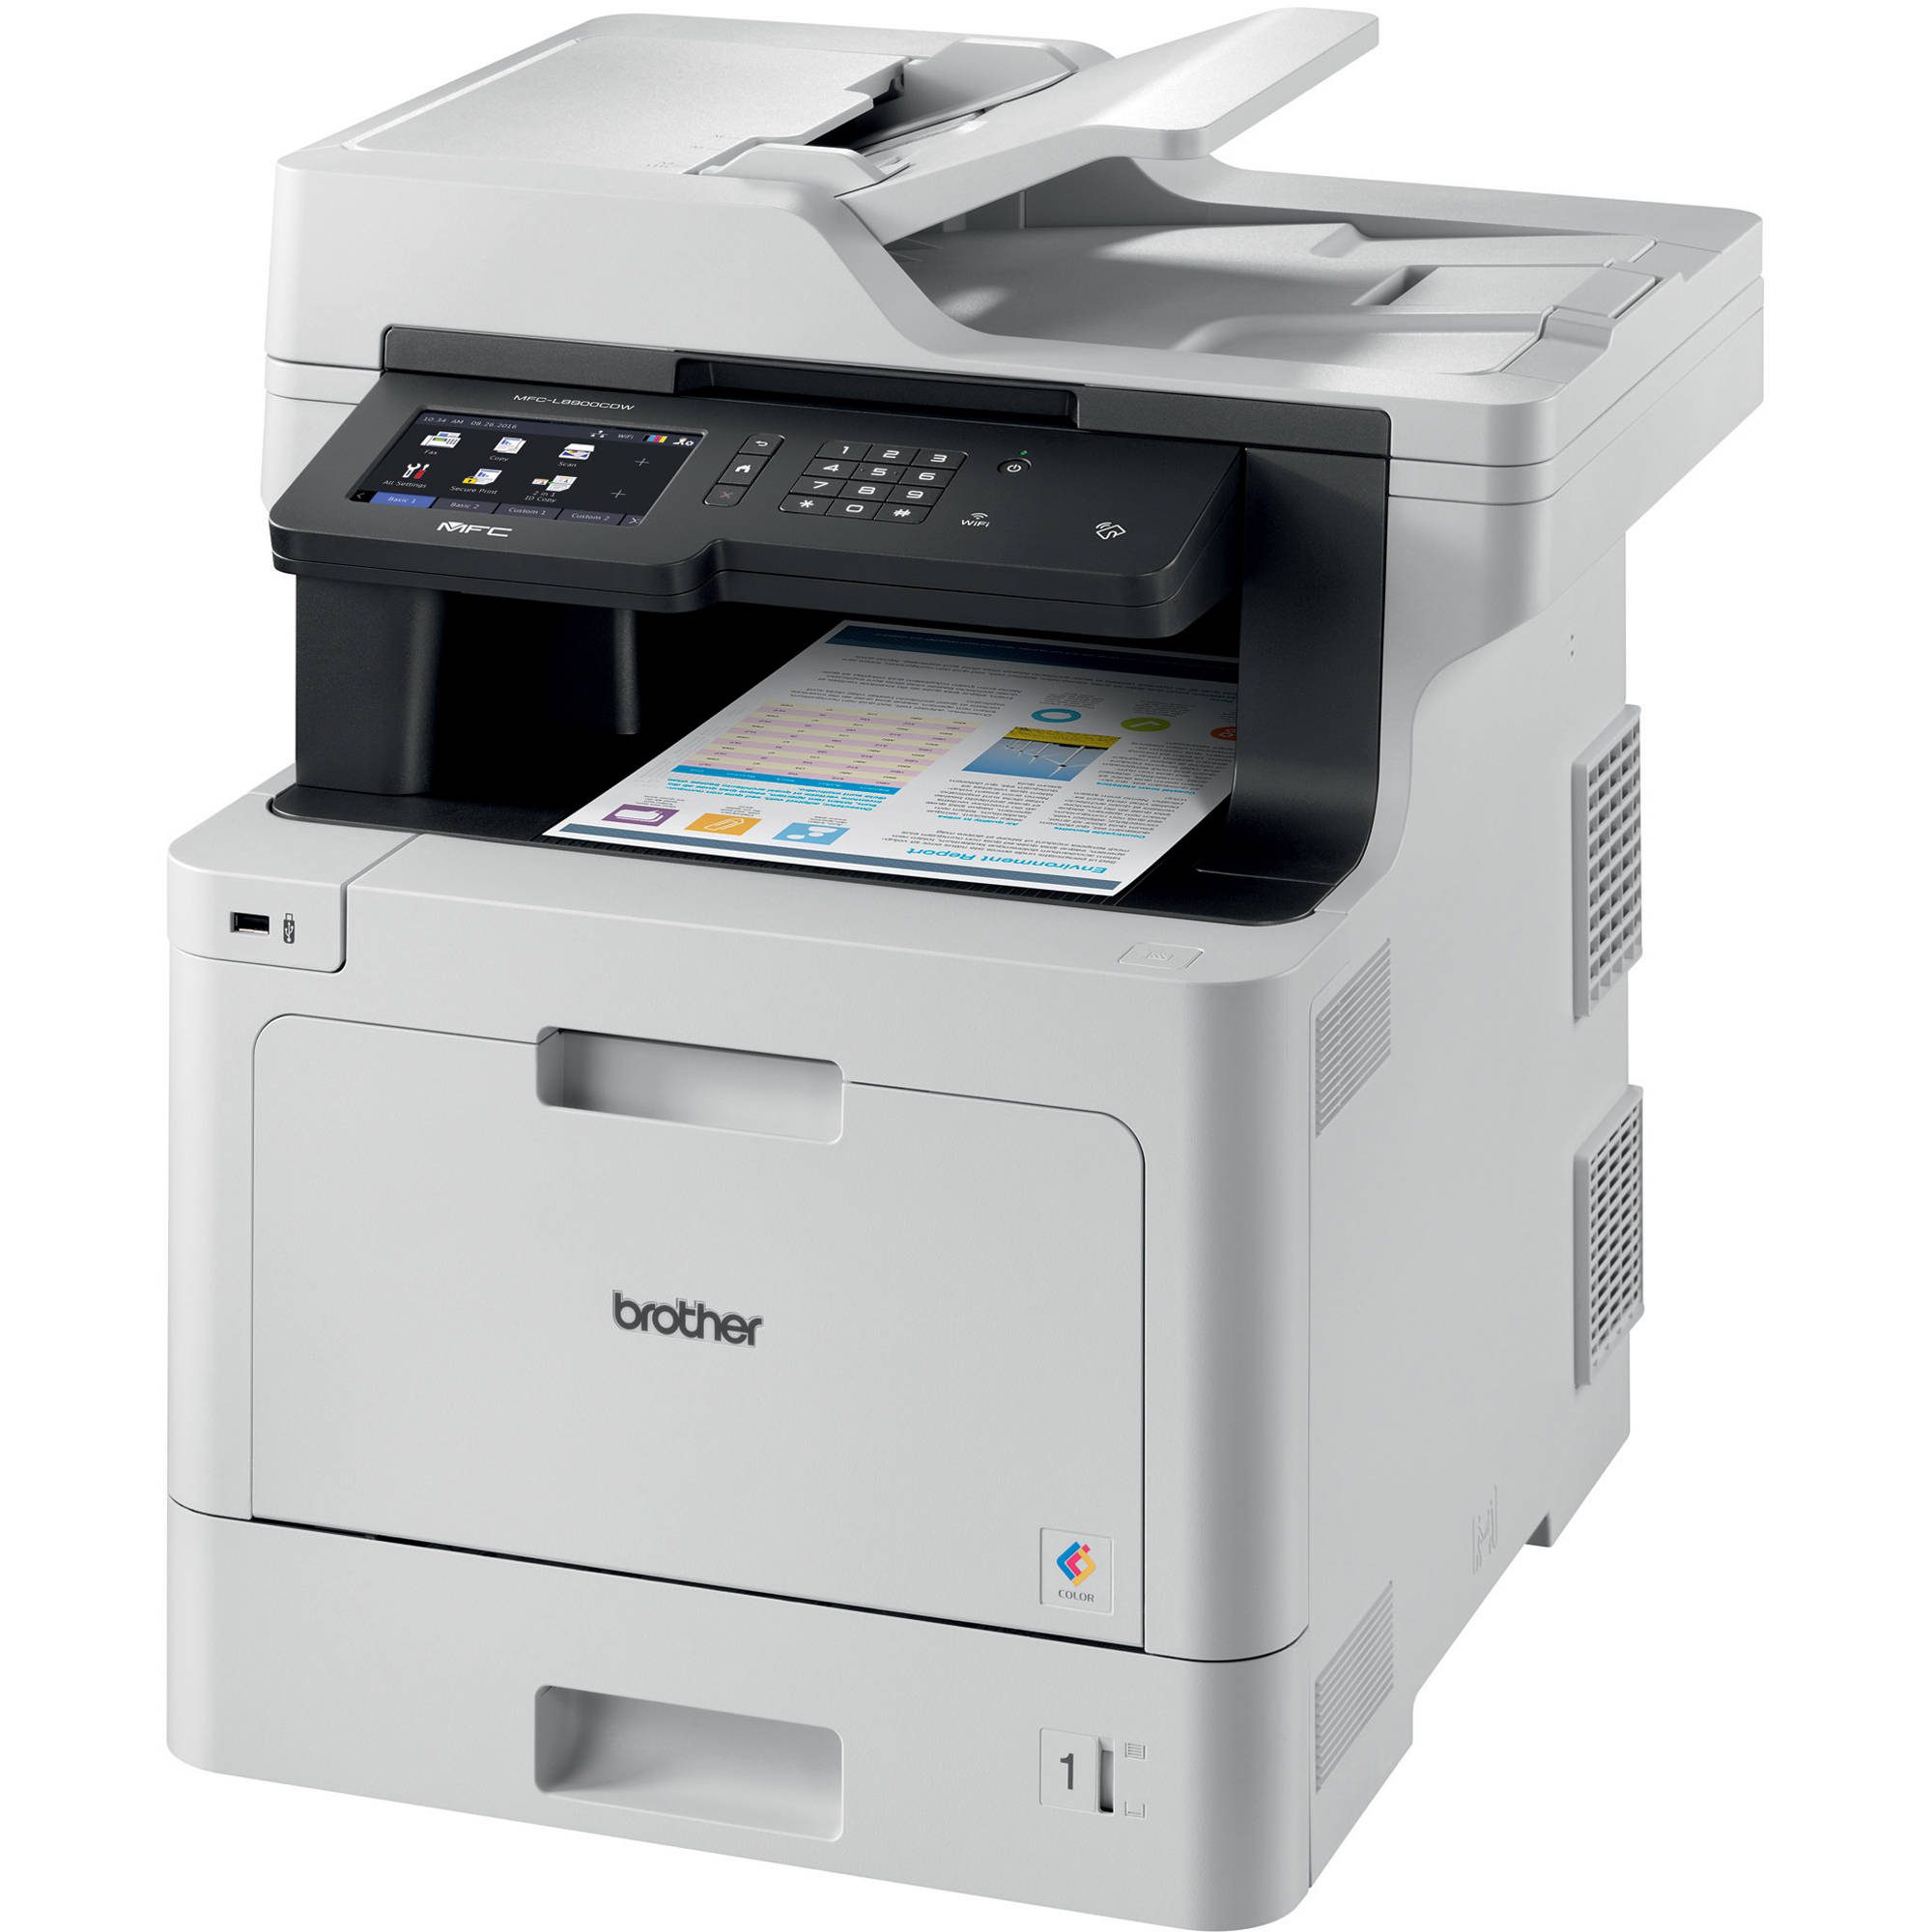 Brother MFC-L8900CDW WIFI color laser multifunction printer 